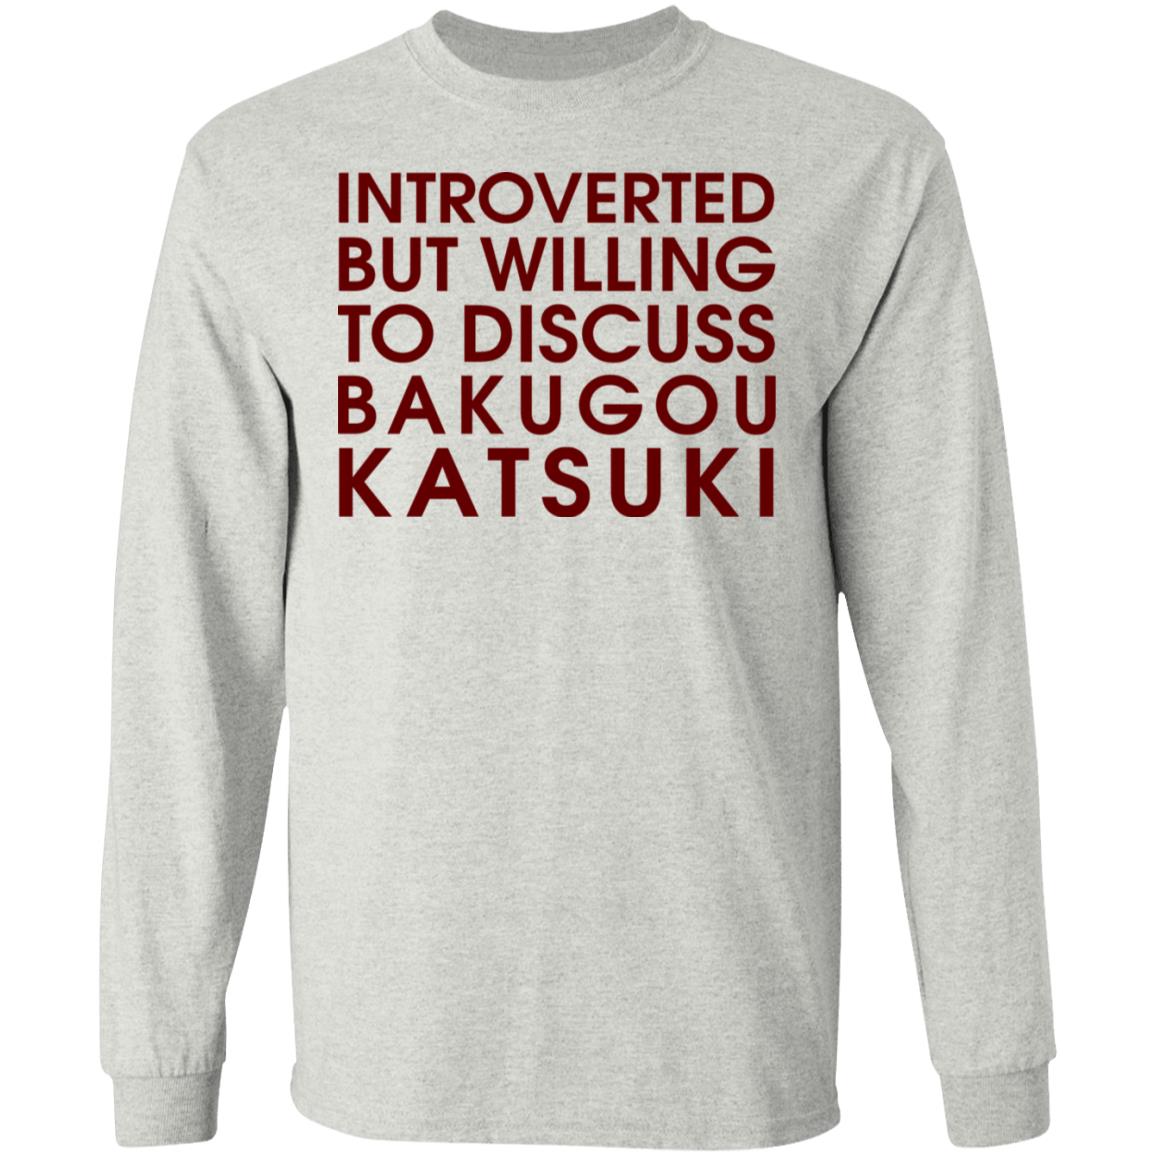 Introverted But Willing To Discuss Bakugou Katsuki Shirt Gift Size Up To 5xl